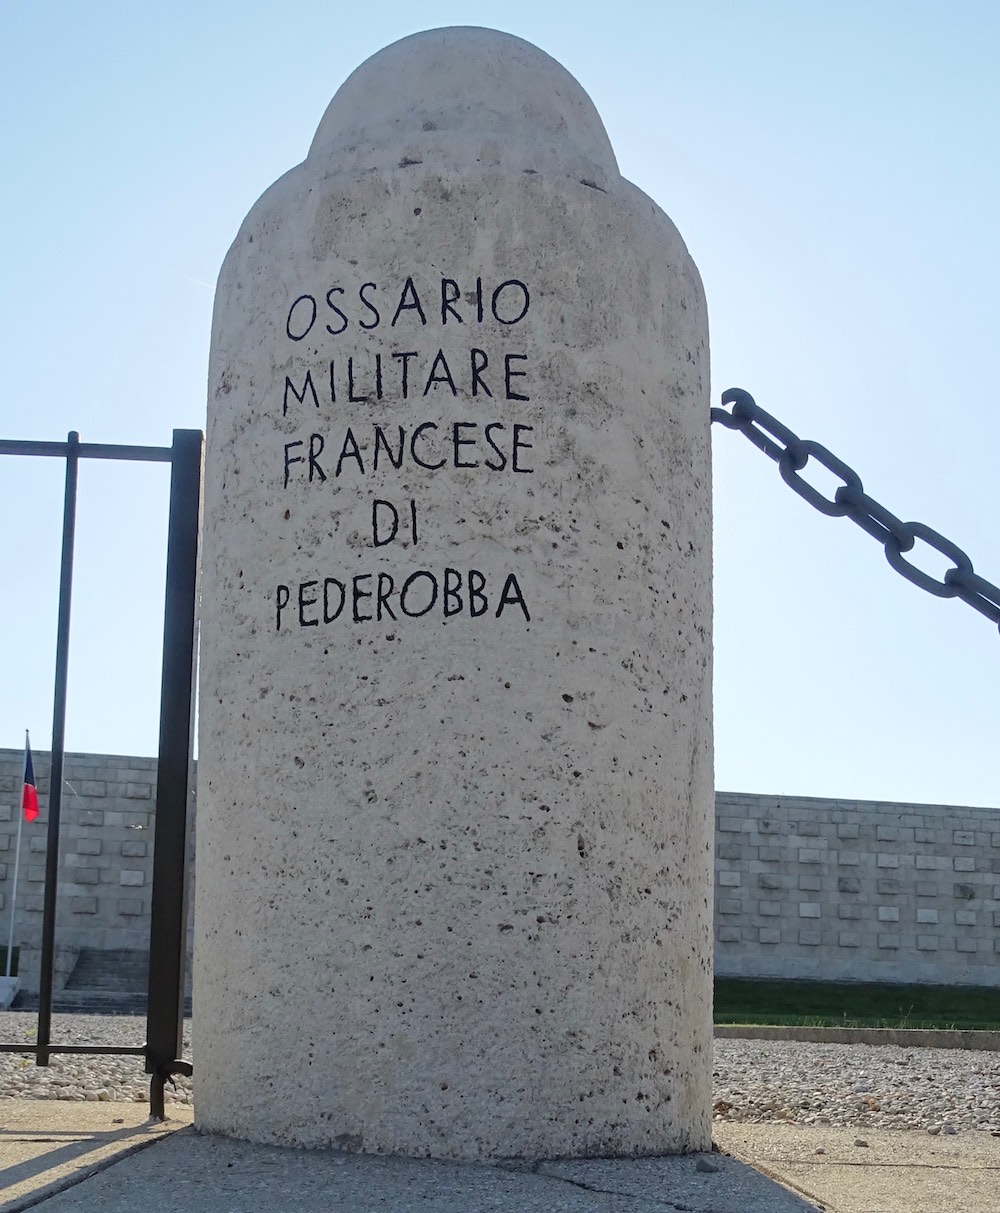 Ossuary French Soldiers Pederobba #3